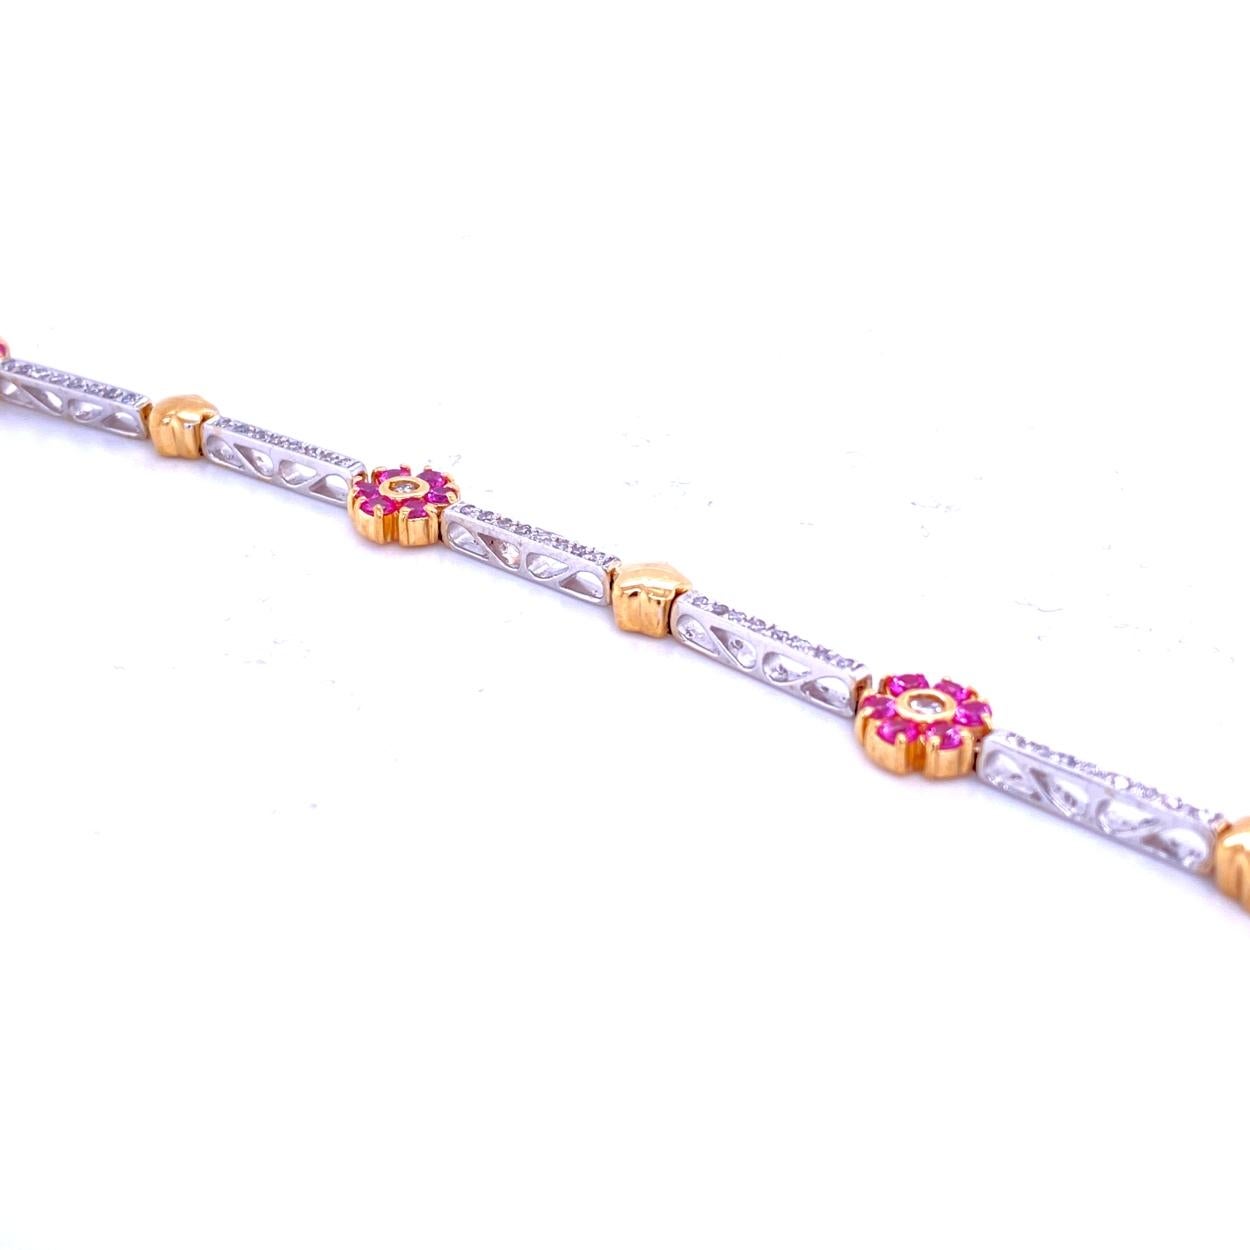 This Diamond/Pink Sapphire Bracelet consists of 7 Pave Set Bar Links, 4 Pick Sapphire Round Clusters with diamond center and 4 Yellow Gold Stars.  The bracelet is made in 14K Two tone Gold with total of 0.67 Ct Round Brilliant diamonds and 1.59 Ct